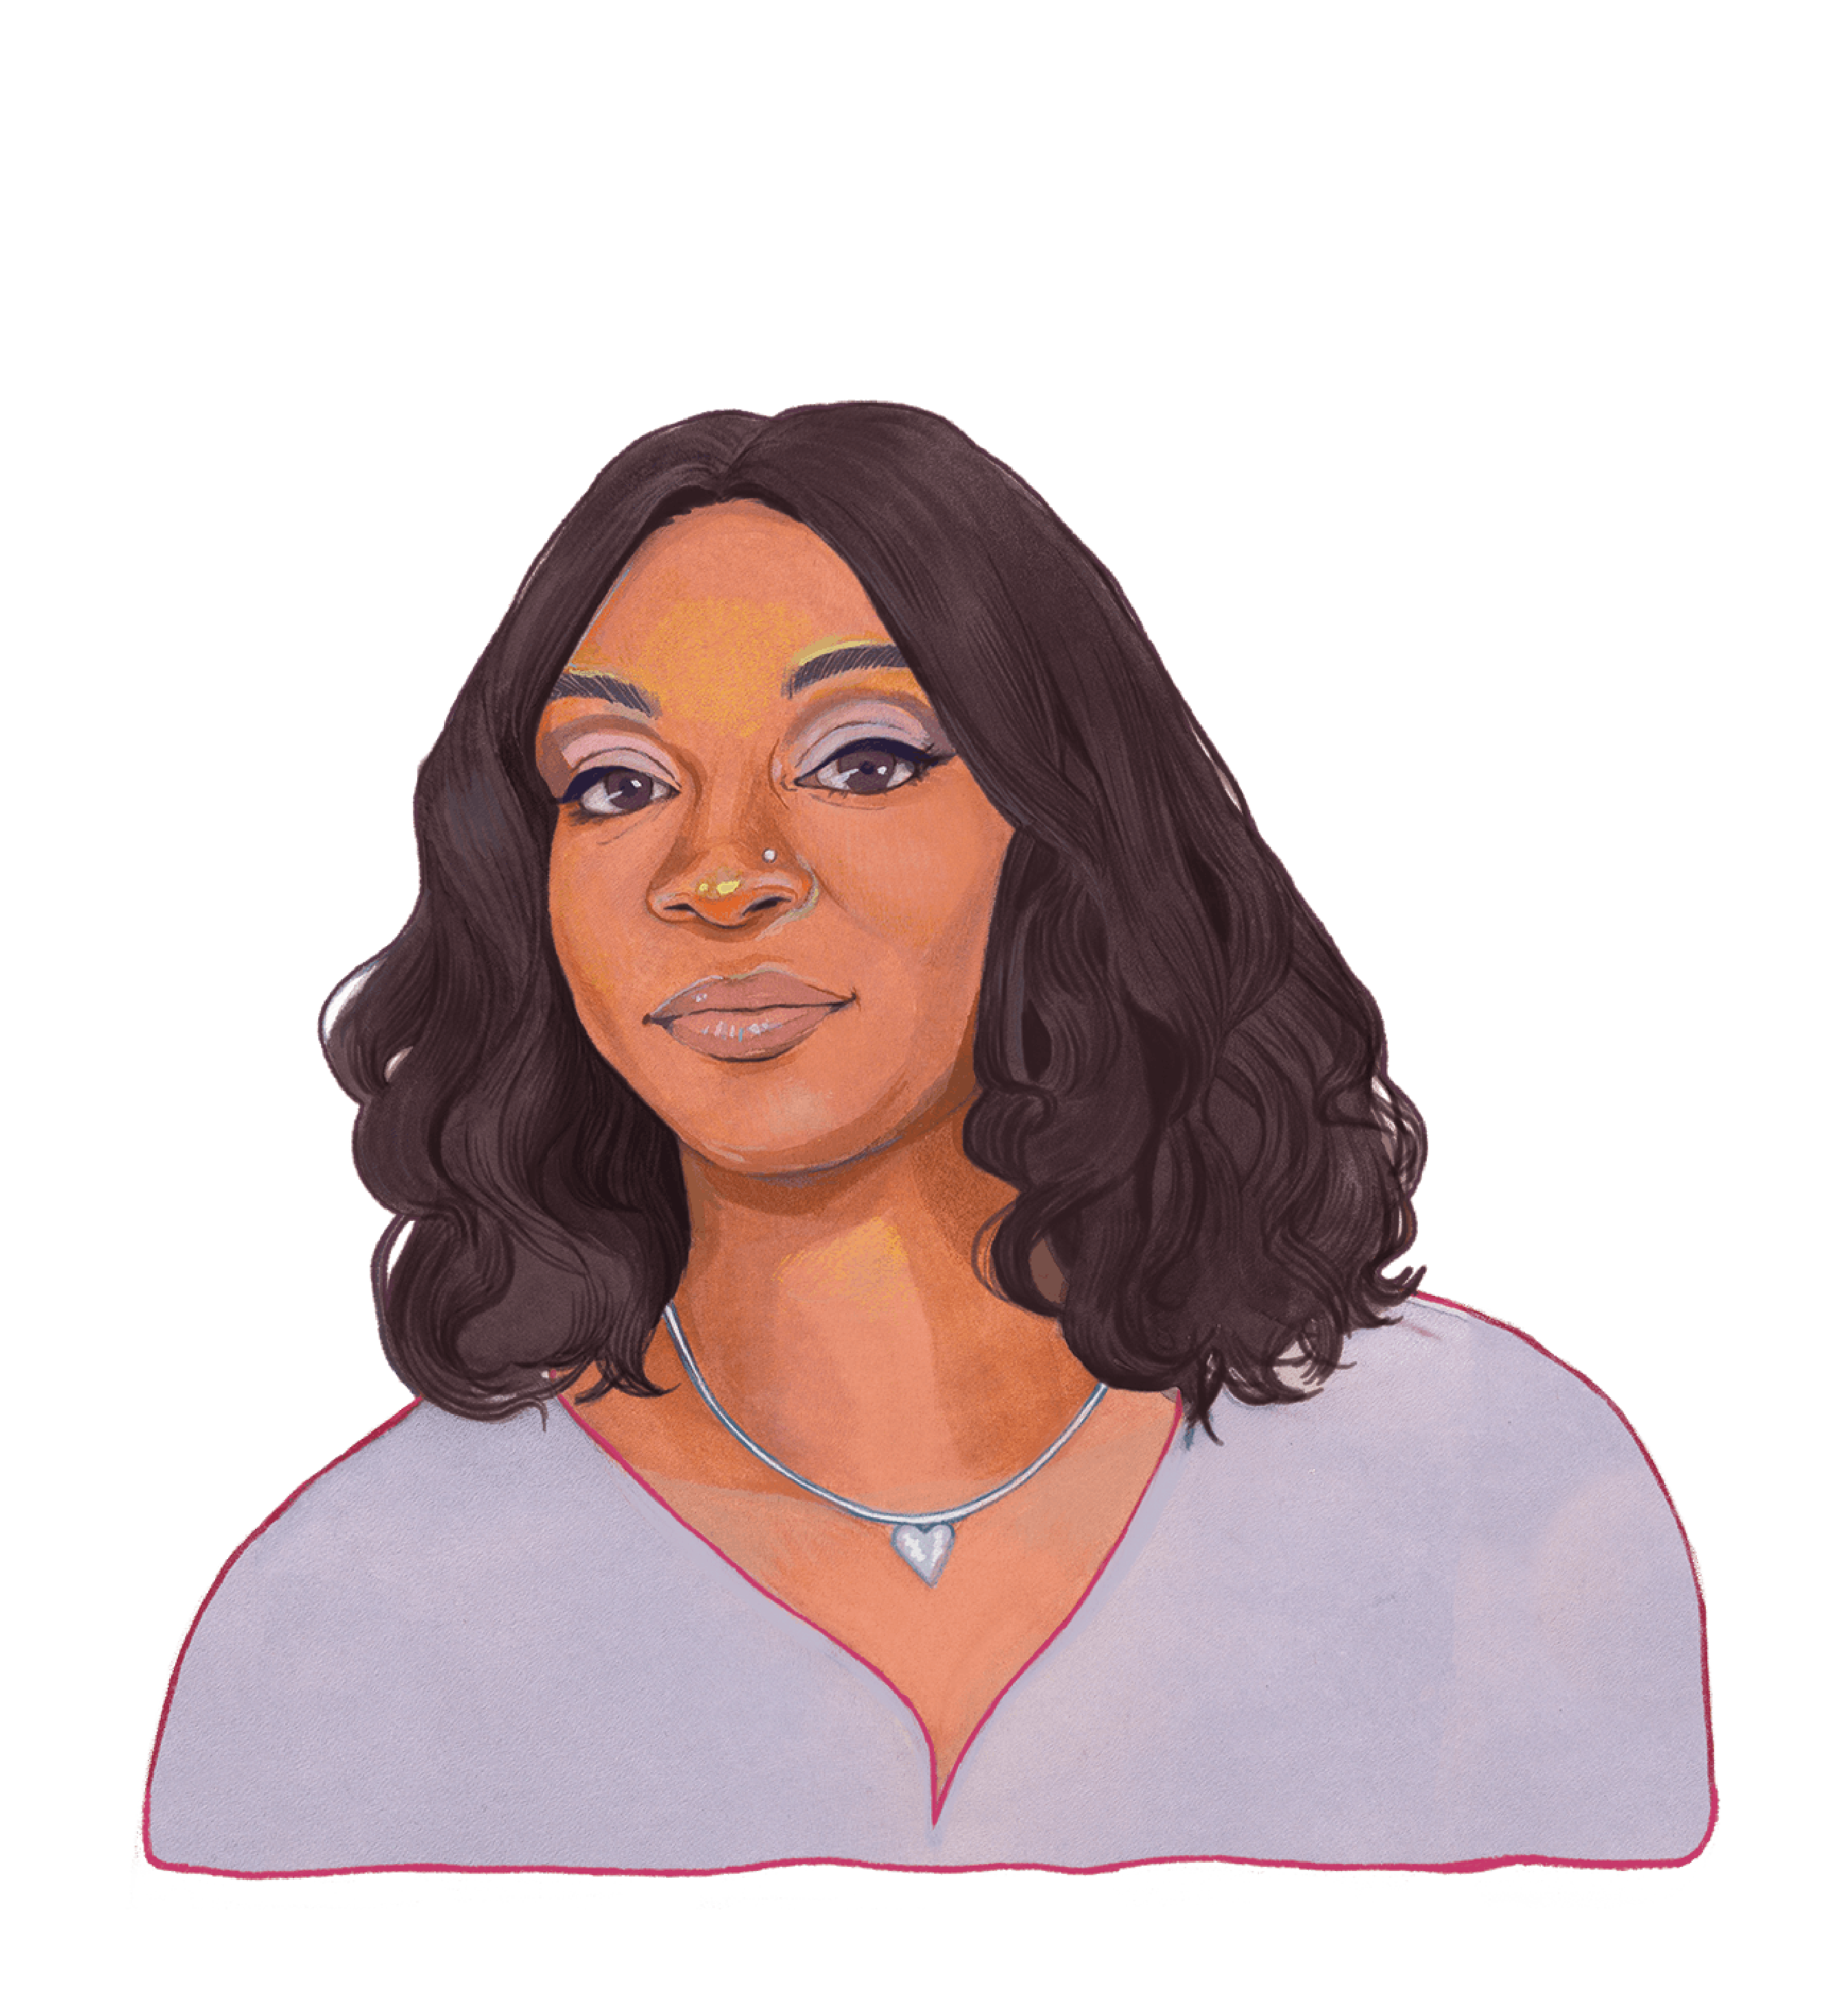 Color illustration of Renita Francois, a person with a medium-dark skin tone wearing a necklace and lilac shirt. They have parted dark brown shoulder length hair and a calm expression on their face.